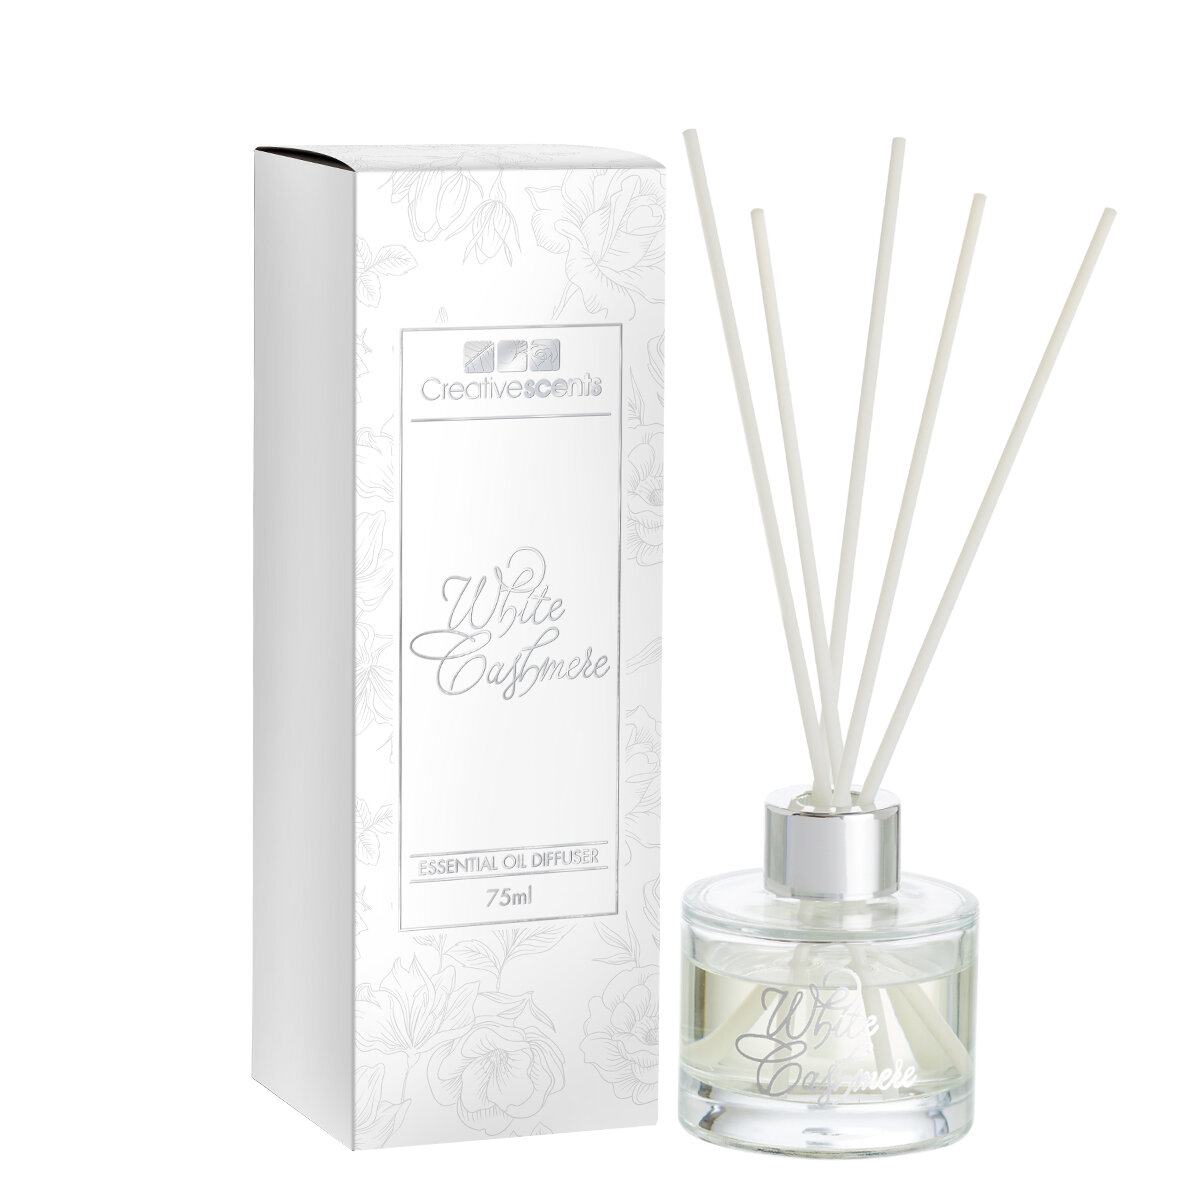 Creative Scents Cashmere Reed Diffusers And Sticks